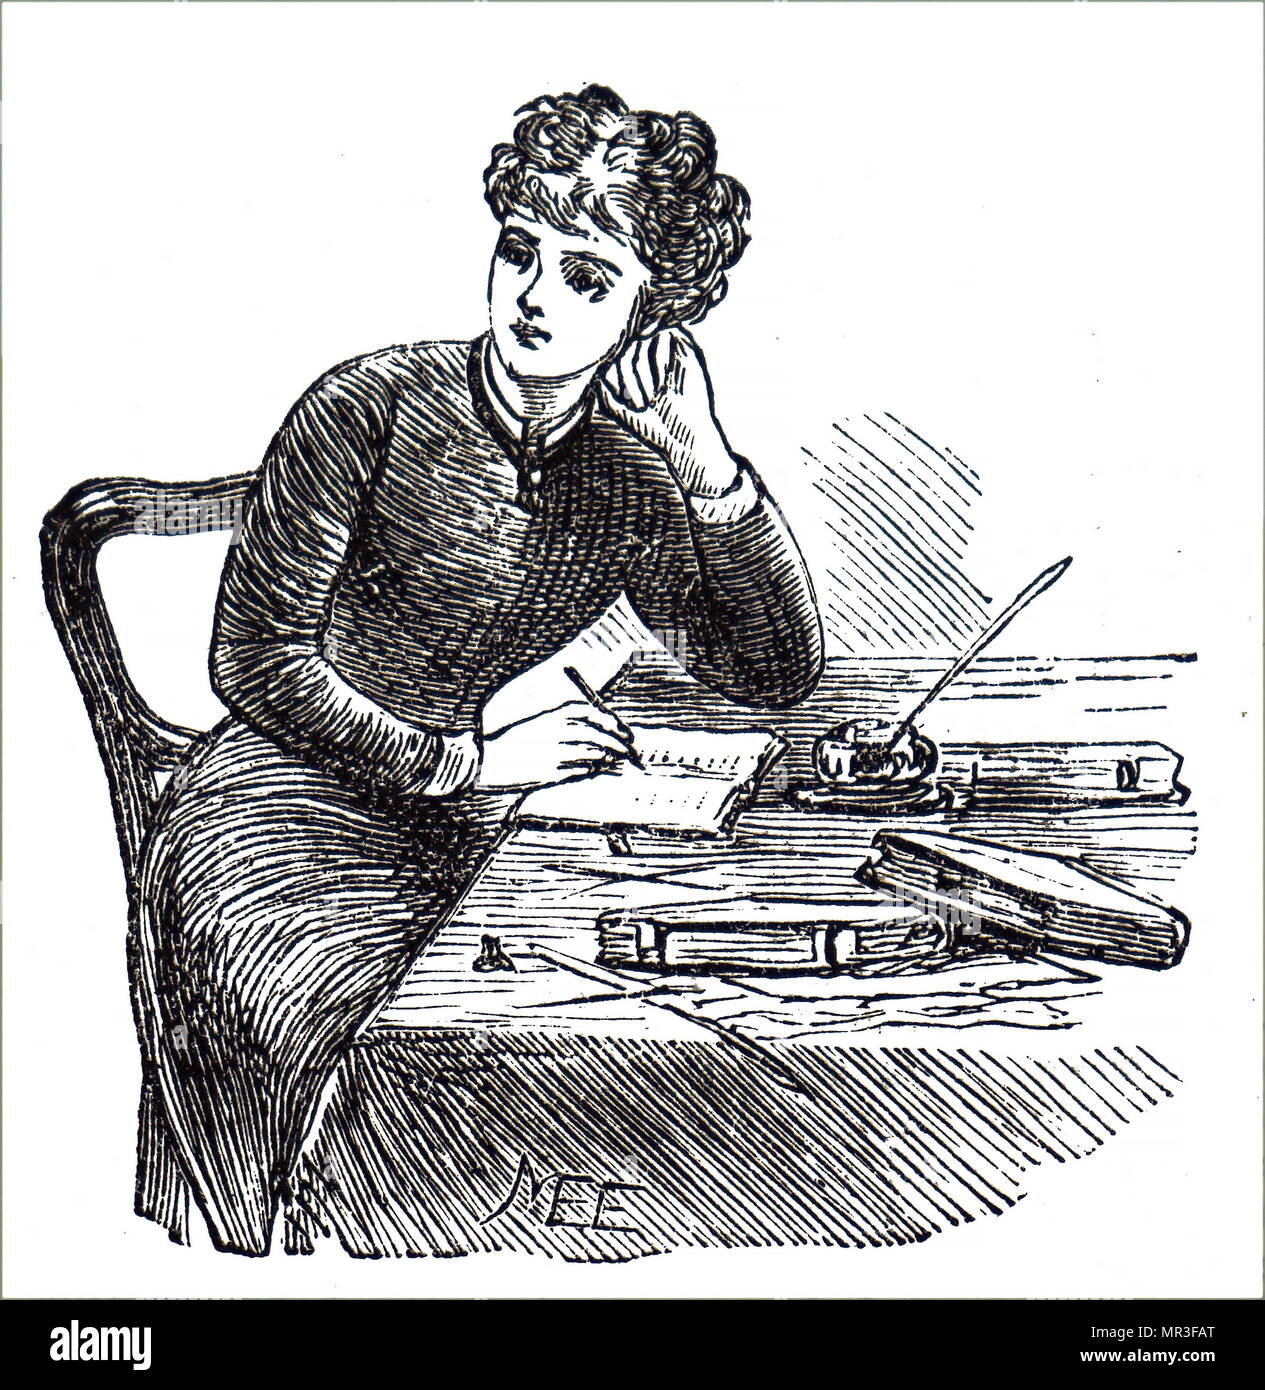 Illustration depicting a young girl writing a letter at her desk. Illustrated by Mary Ellen Edwards (1838-1934) an English artist. Dated 19th century Stock Photo